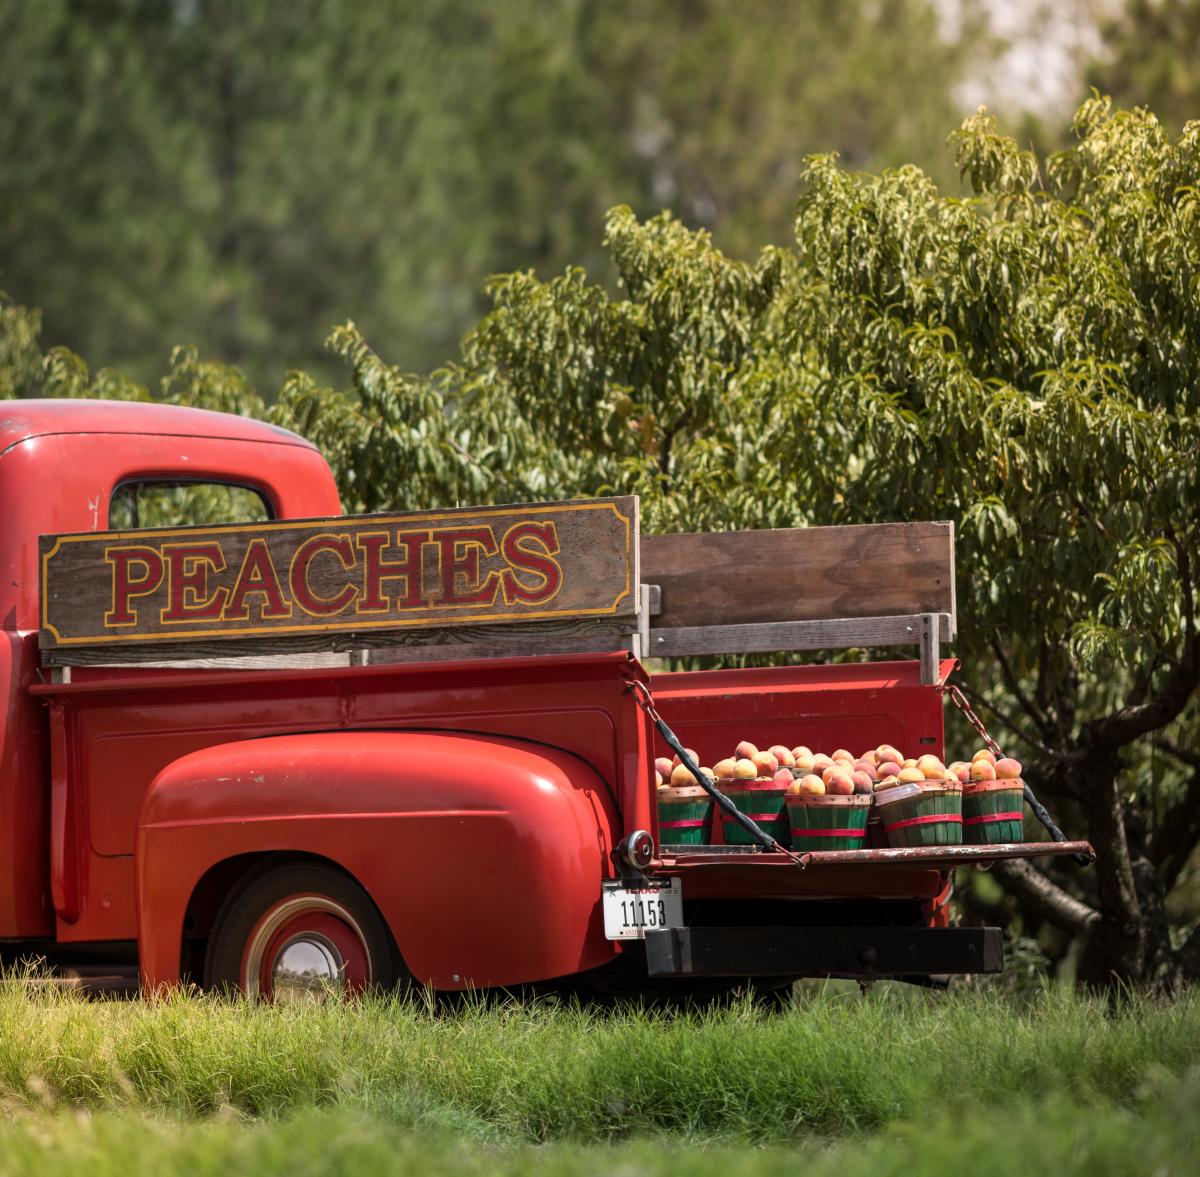 Red truck with wooden "Peaches" sign and baskets of fresh peaches